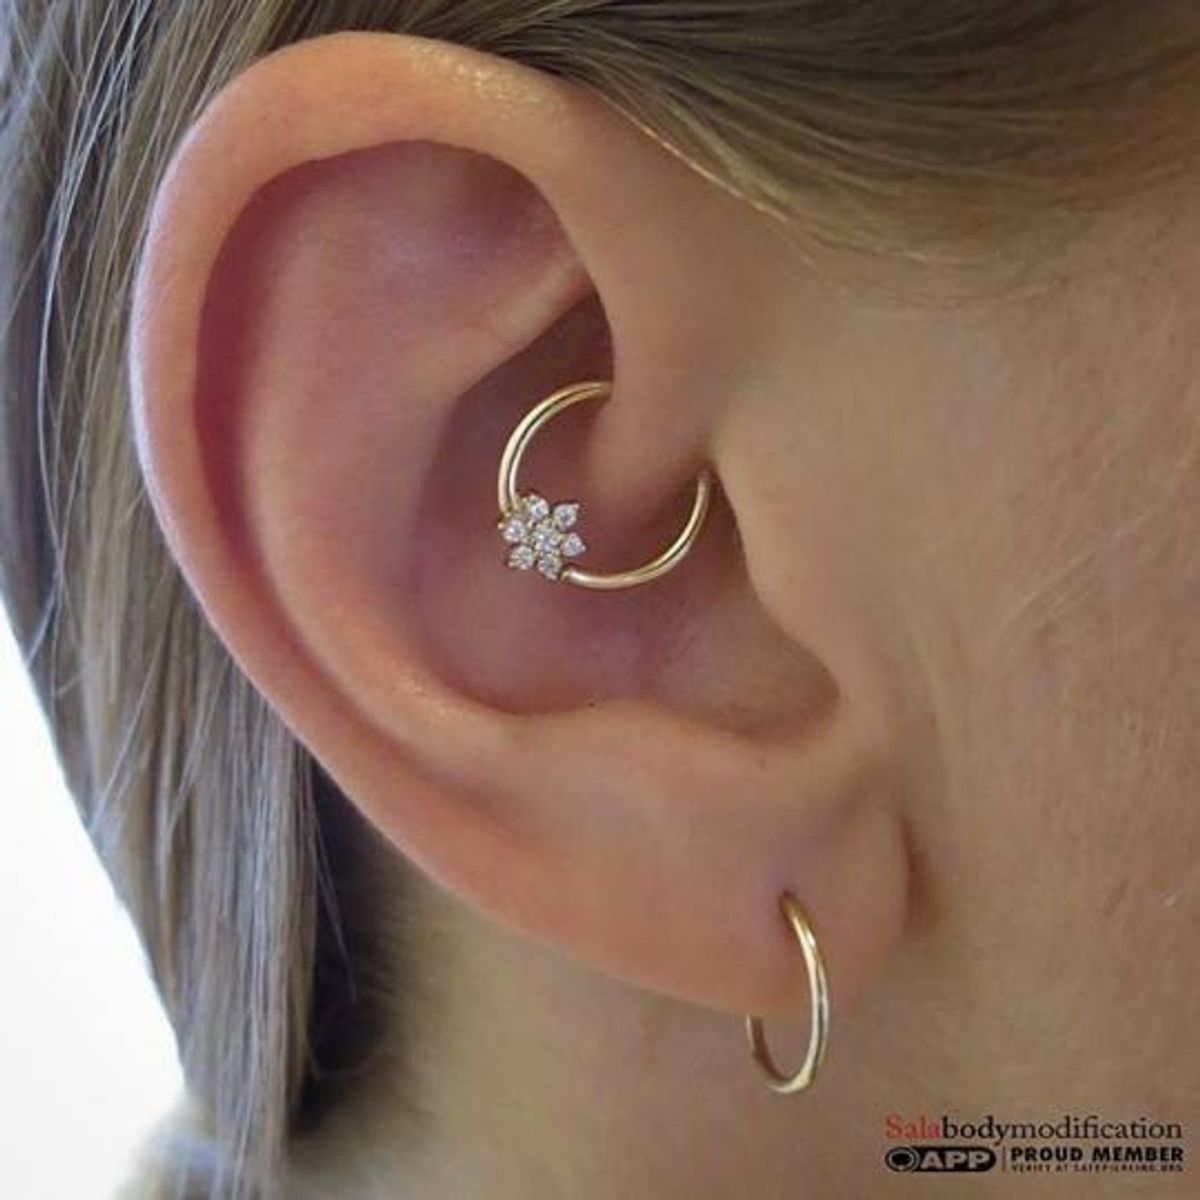 Daith Piercings Relieving Migraines: A Myth?